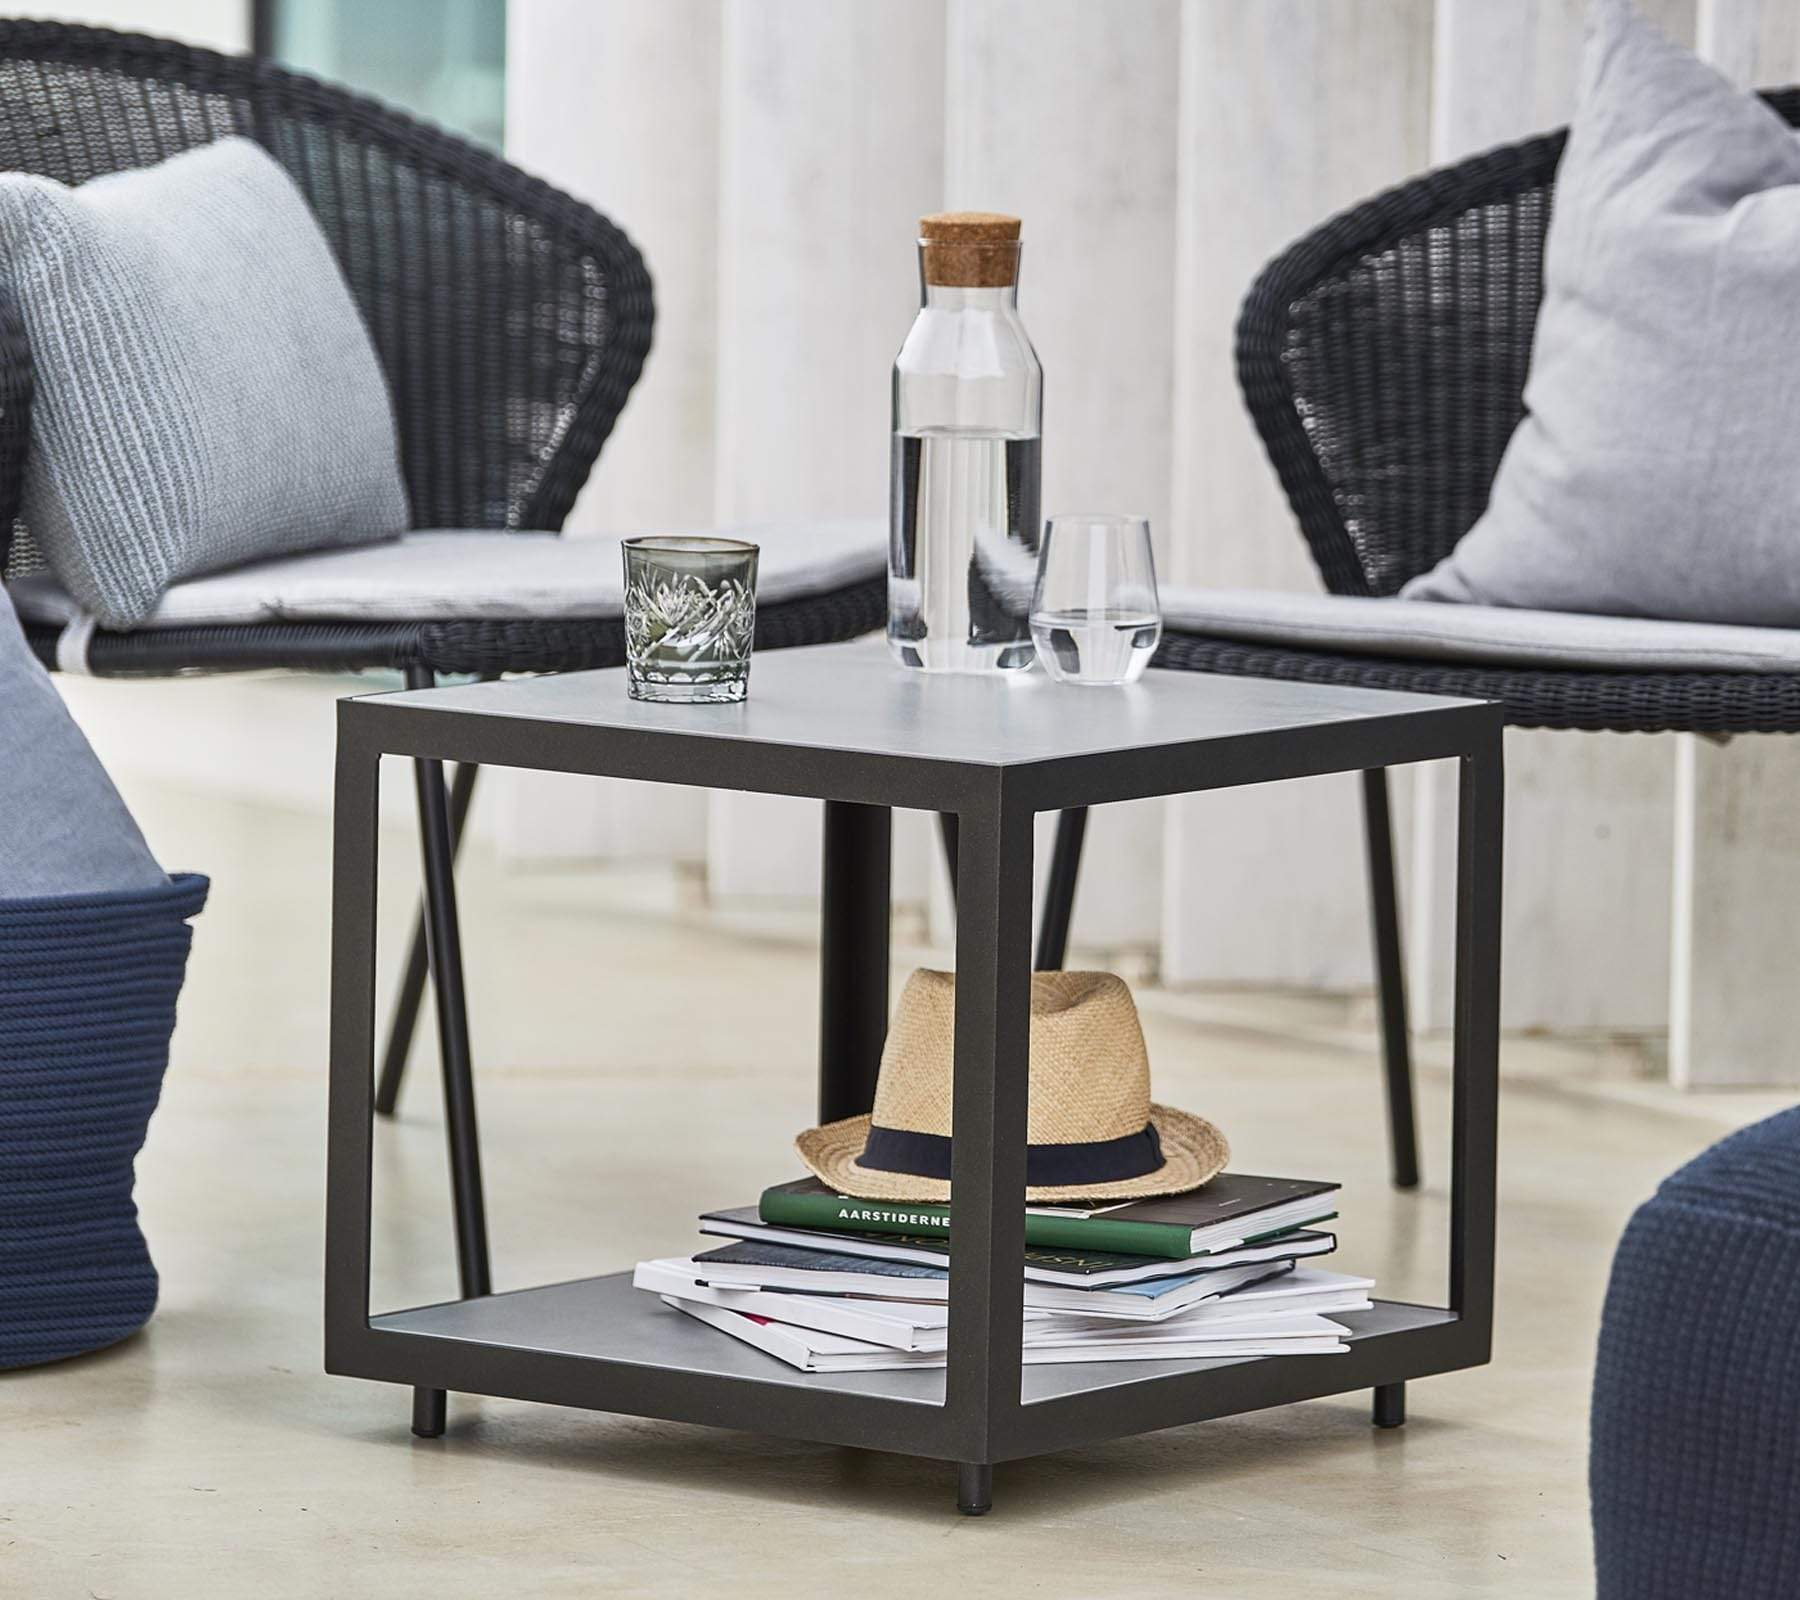 Boxhill's LEVEL Square Coffee Table Lava Grey lifestyle image with 2 glasses of water and bottle container on top, and a hat and books under